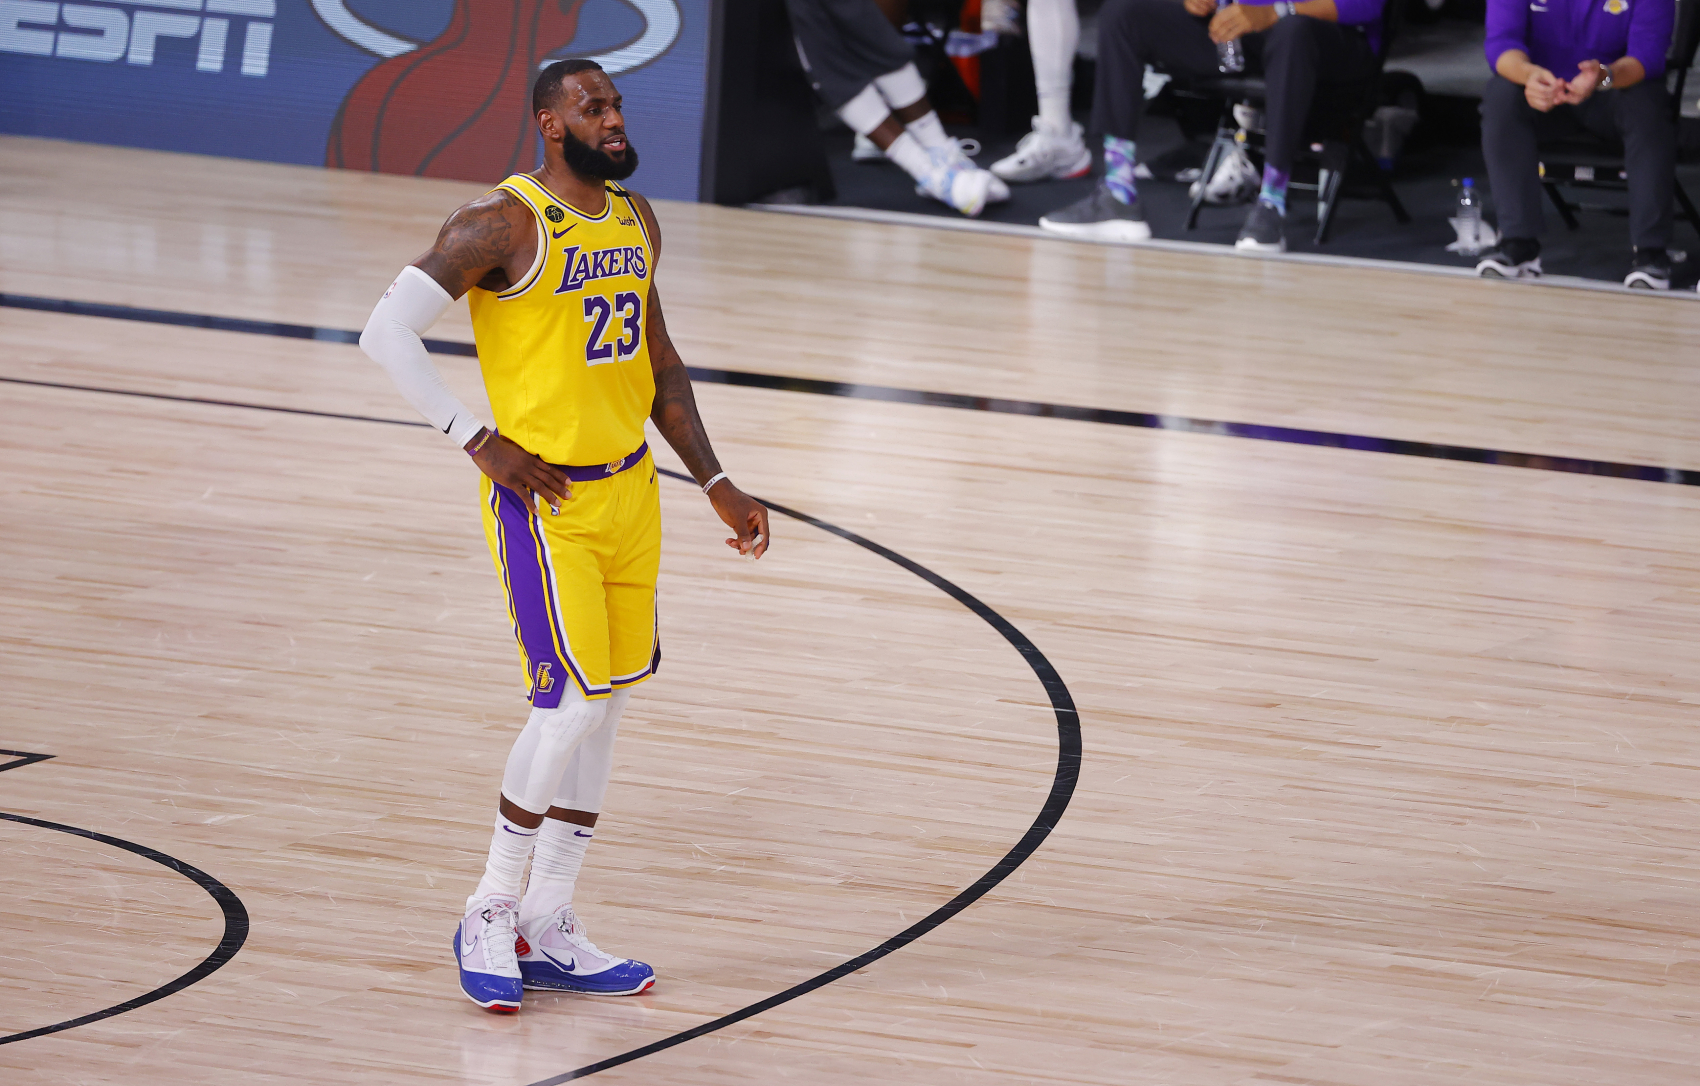 LeBron James has been dominant in the Western Conference with the LA Lakers. However, his run has a Denver Nuggets star fed up.